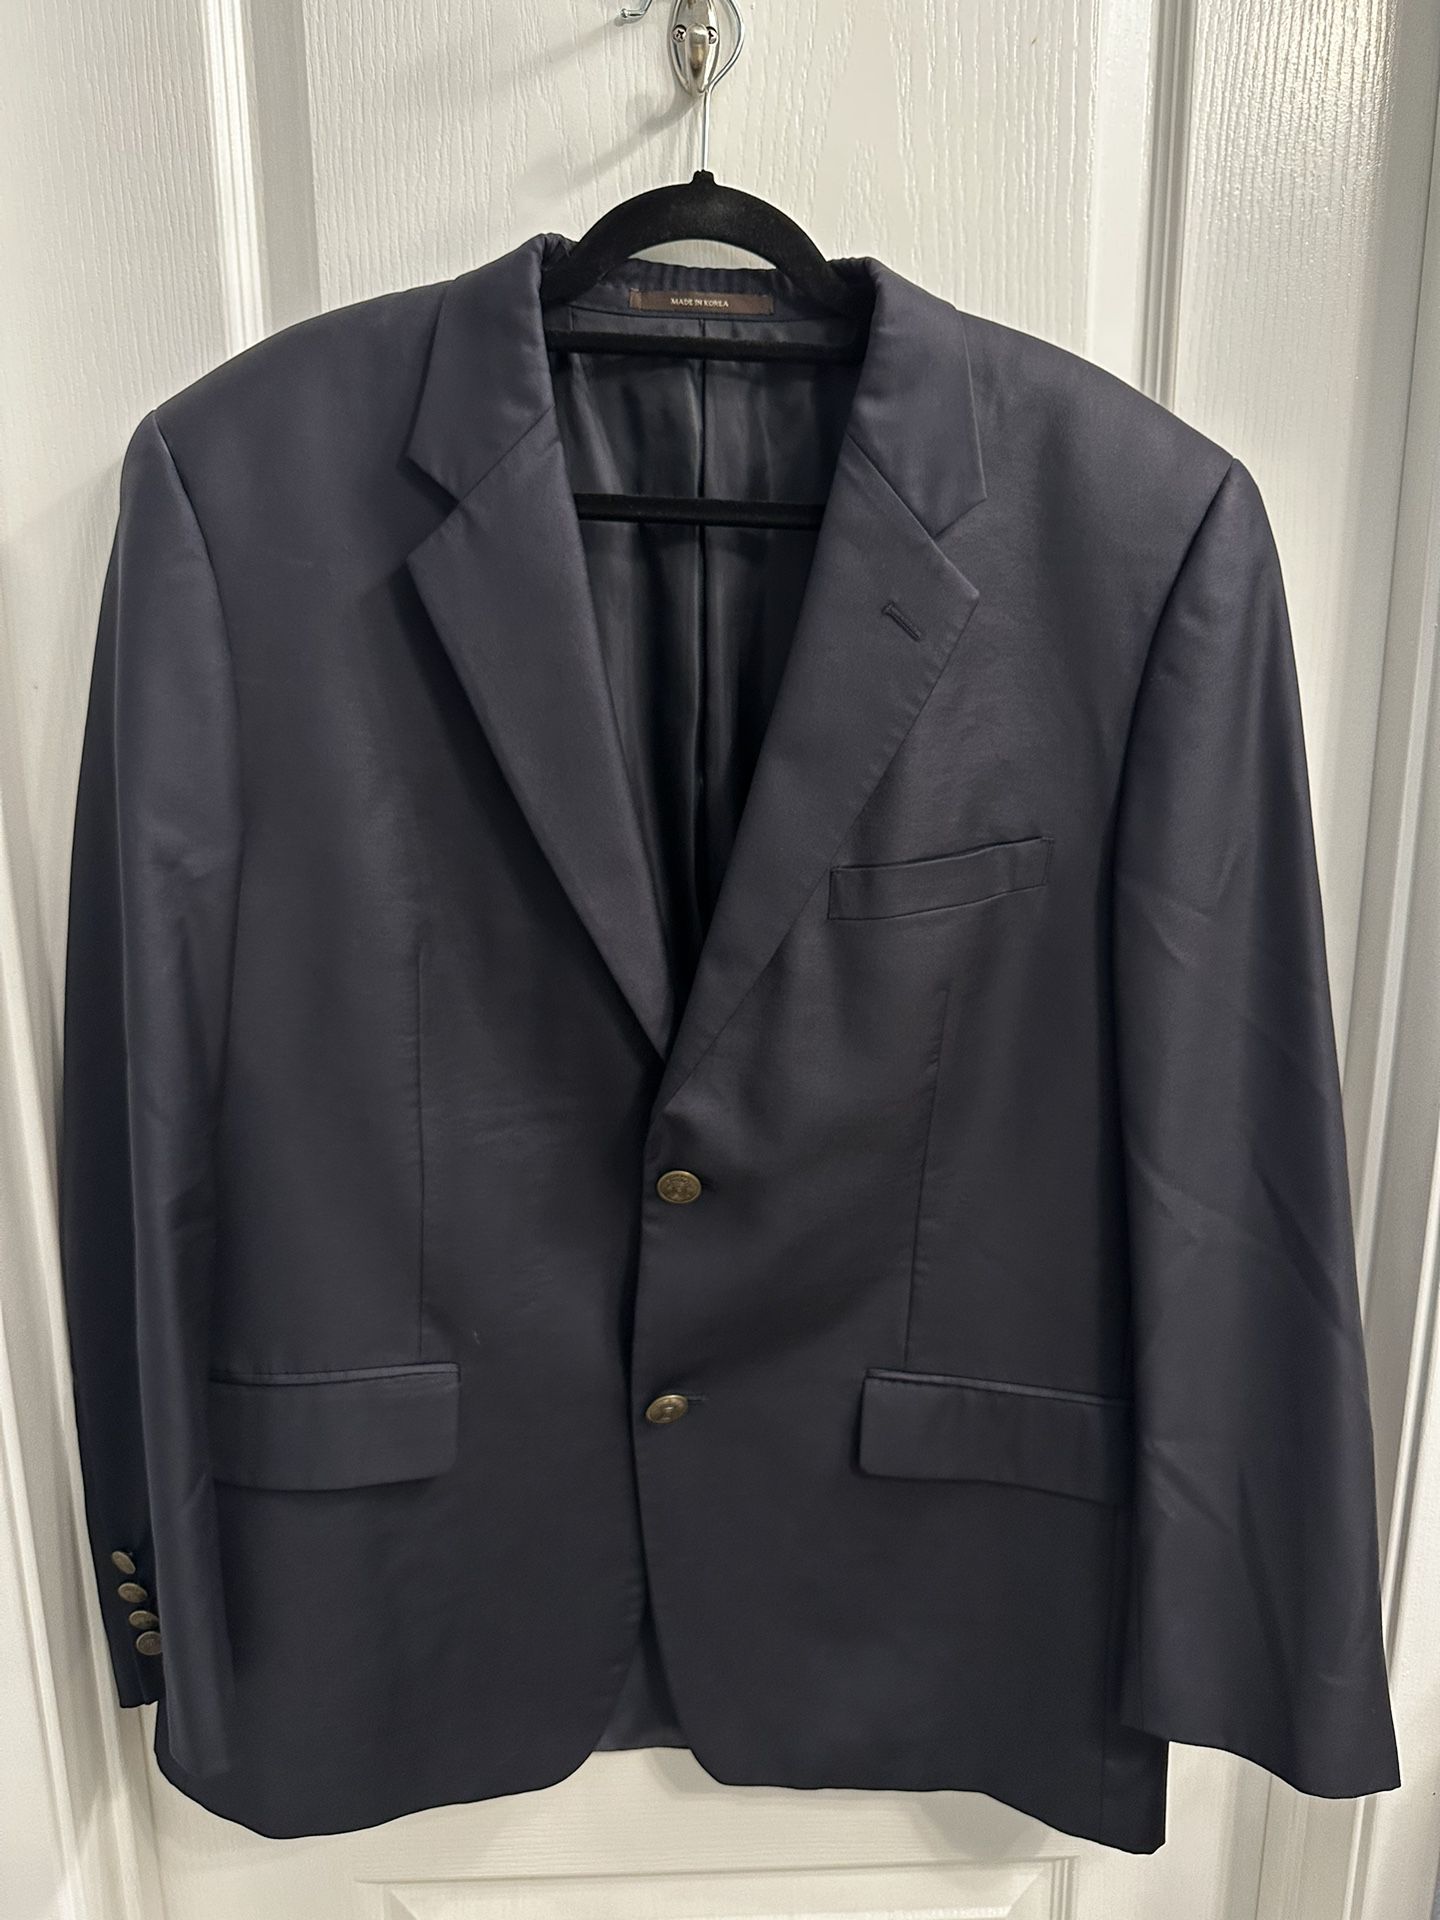 (2) Men’s Suit Jackets Size 44R for Sale in Santee, CA - OfferUp